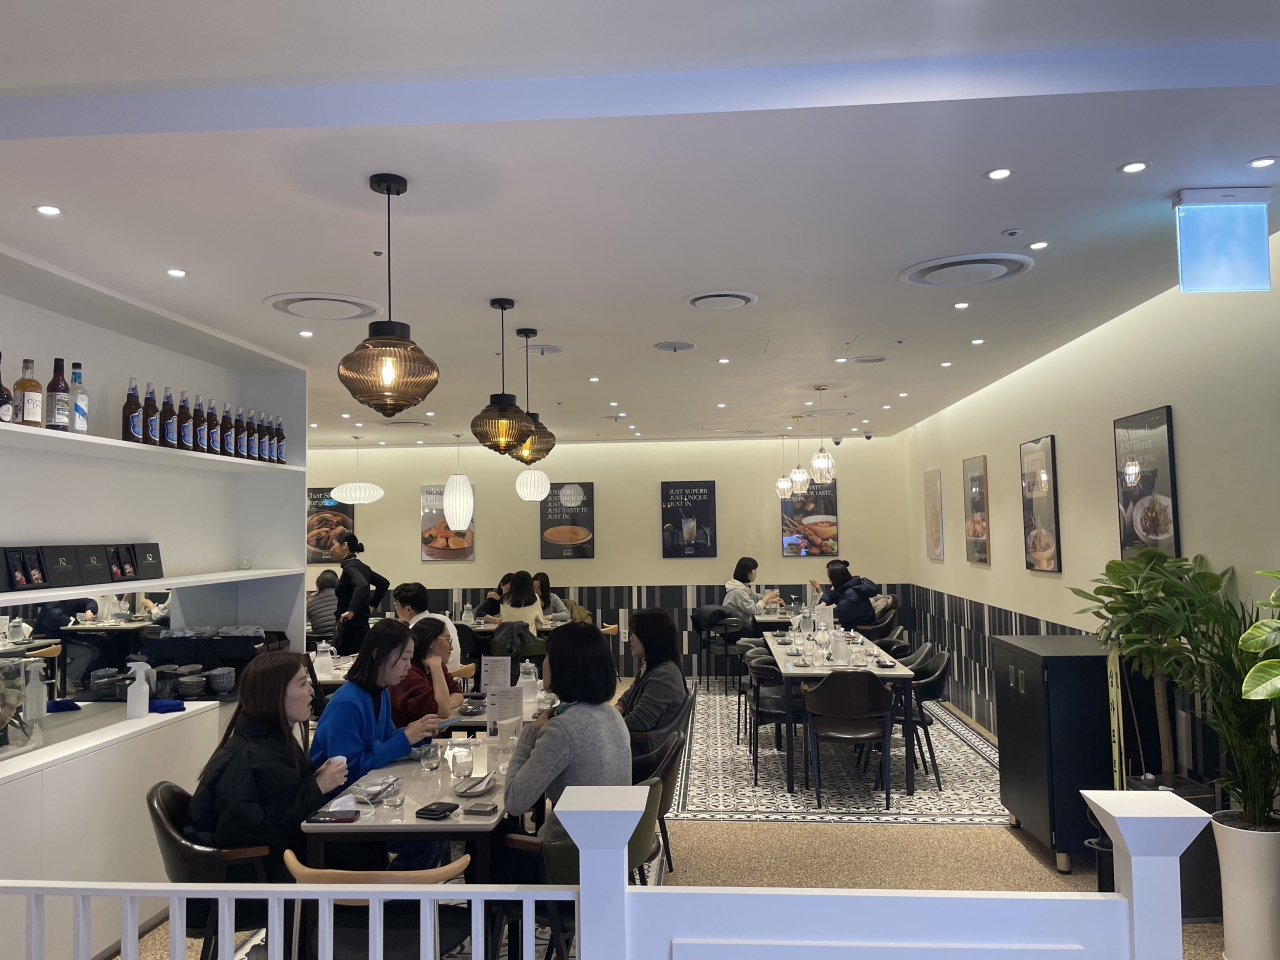 Customers enjoy food at Justin Quek's Flavours of Asia located inside Lotte Department Store's Myeong-dong branch in Seoul. (Kim Da-sol/The Korea Herald)